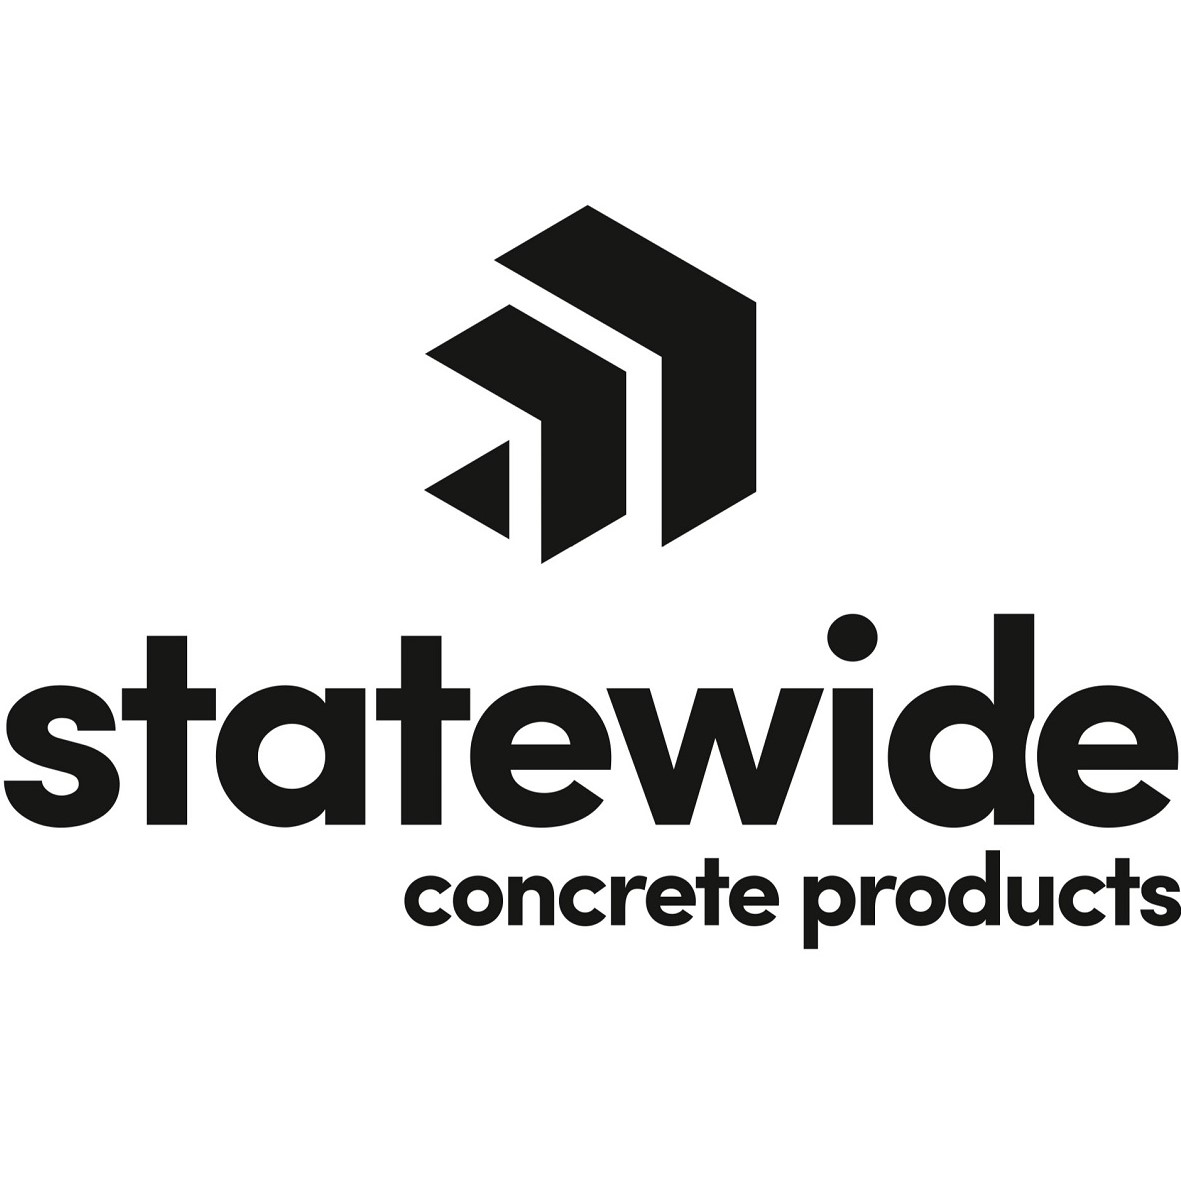 NFco, Statewide Concrete Products As Seen In The Block